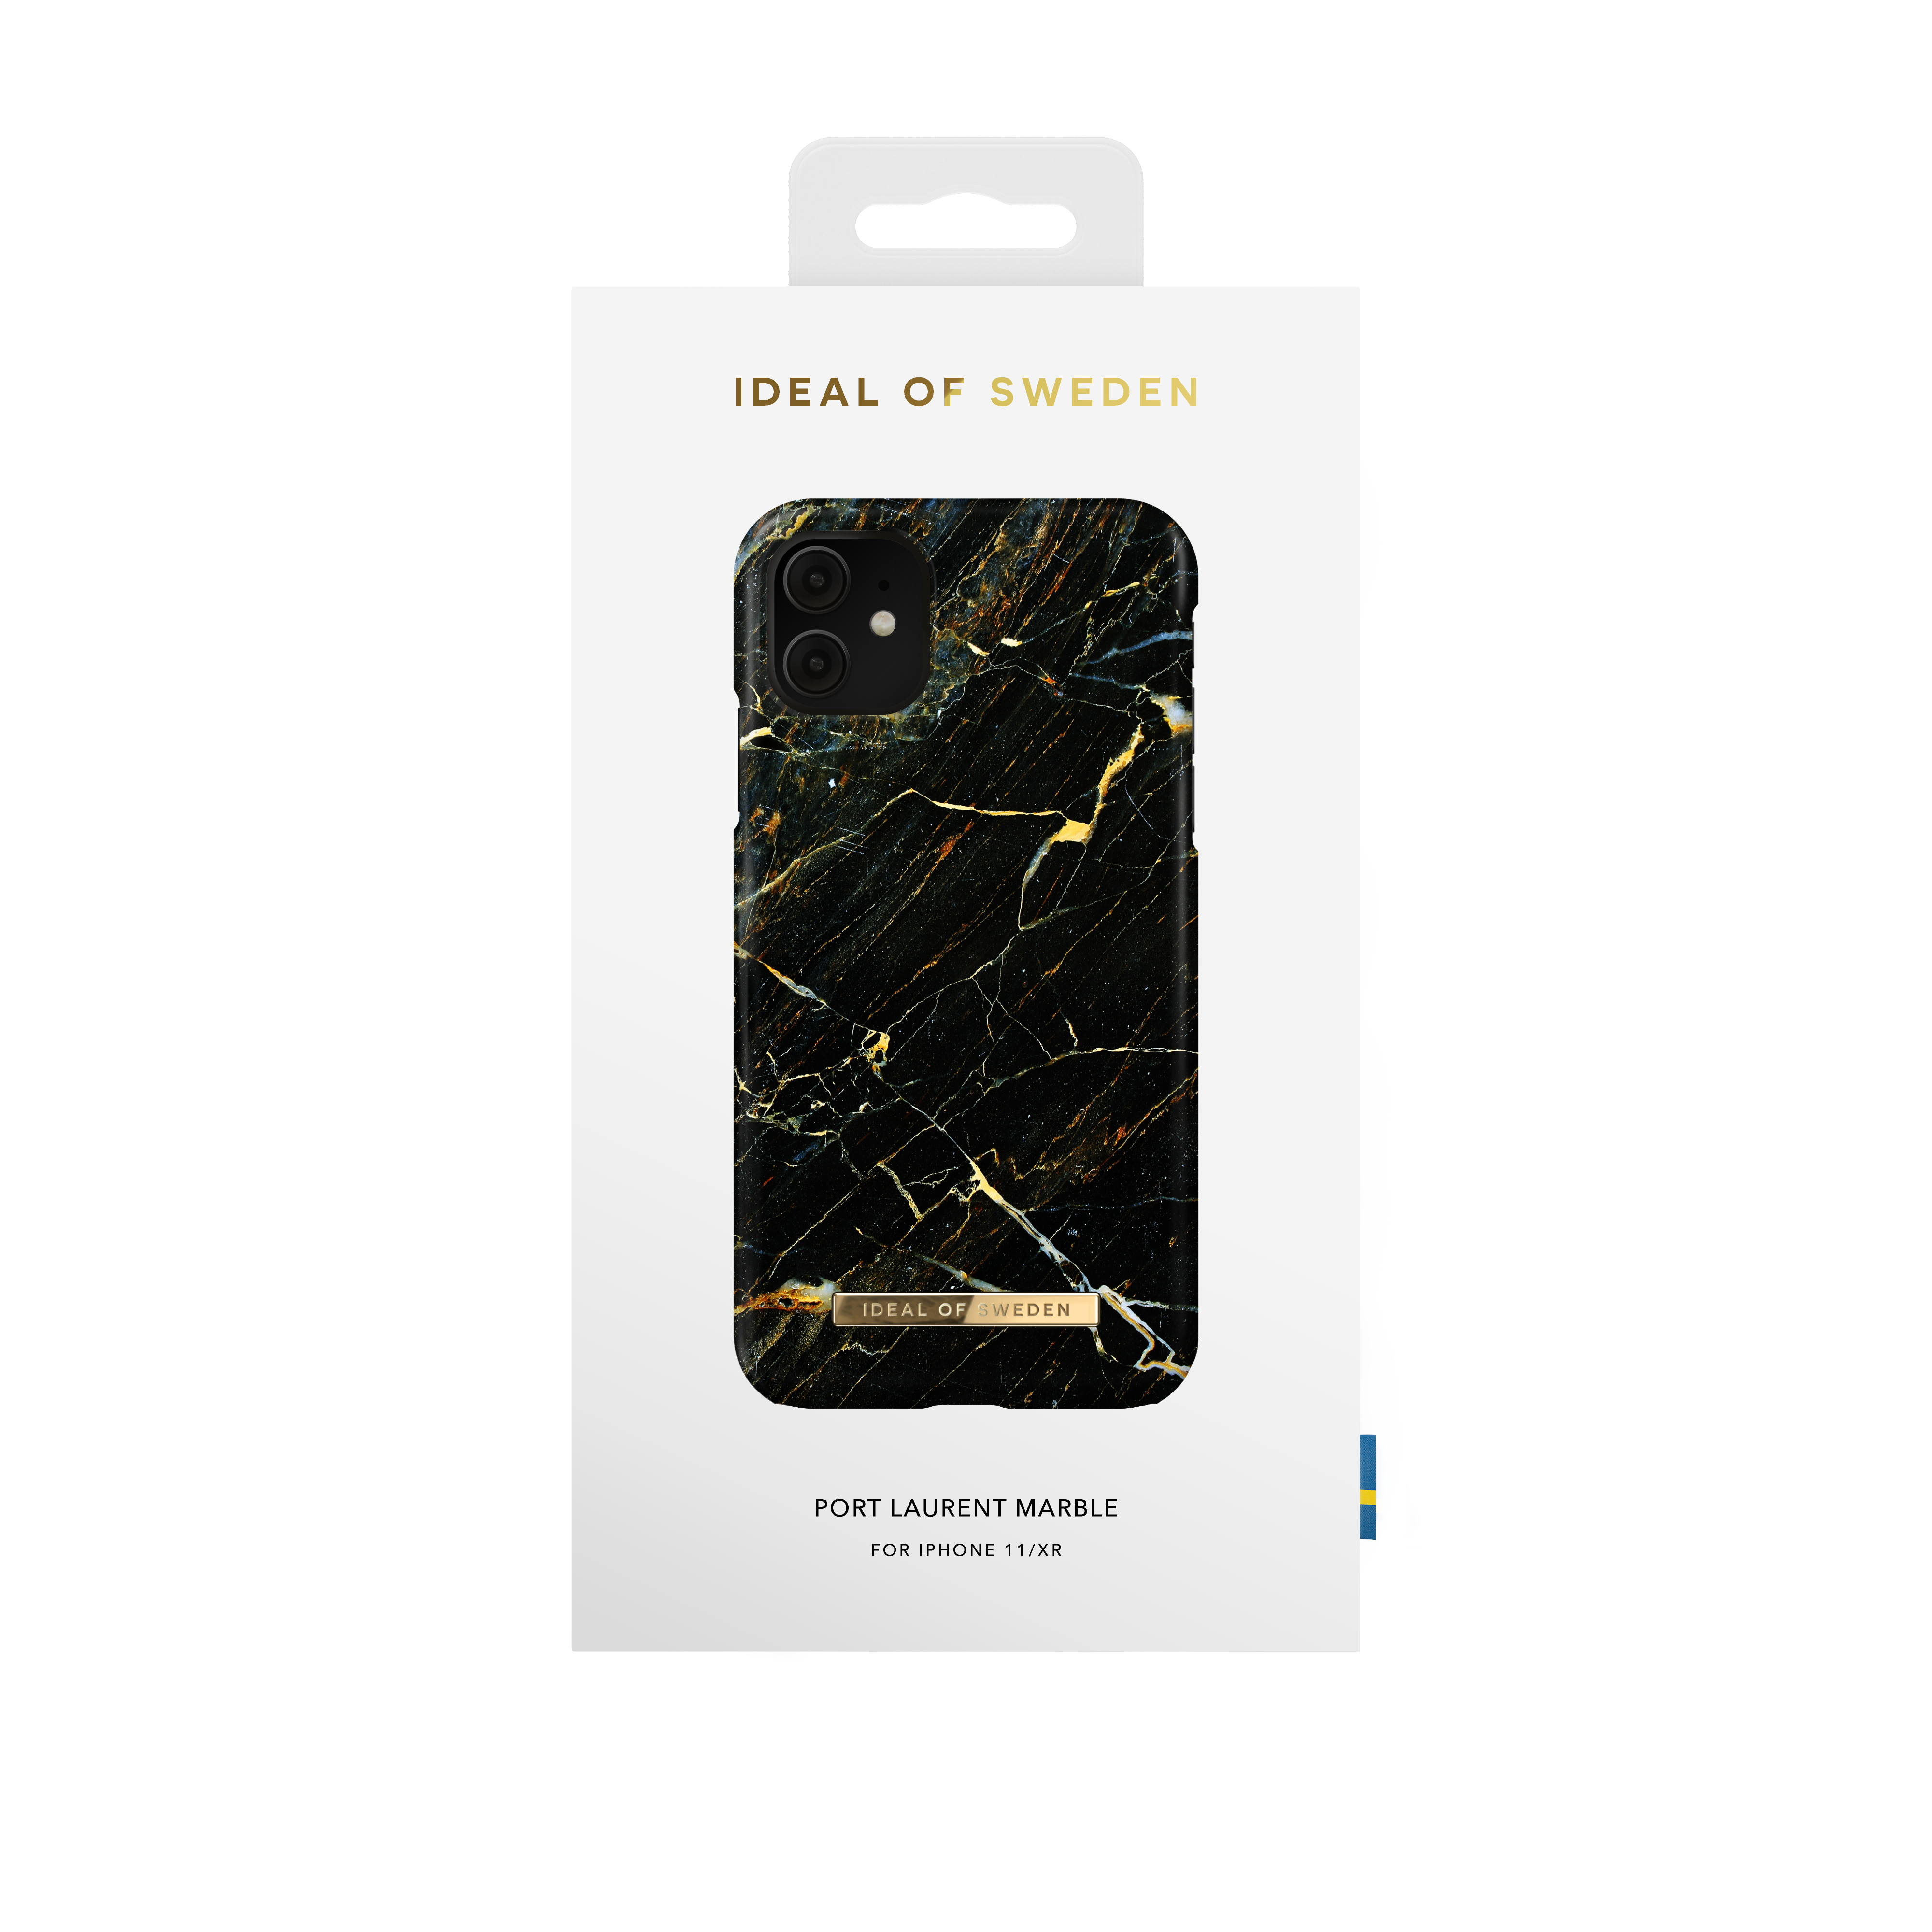 IDEAL OF SWEDEN IDFCA16-I1961-49, Backcover, 11, XR, Laurent Marble iPhone iPhone Port Apple